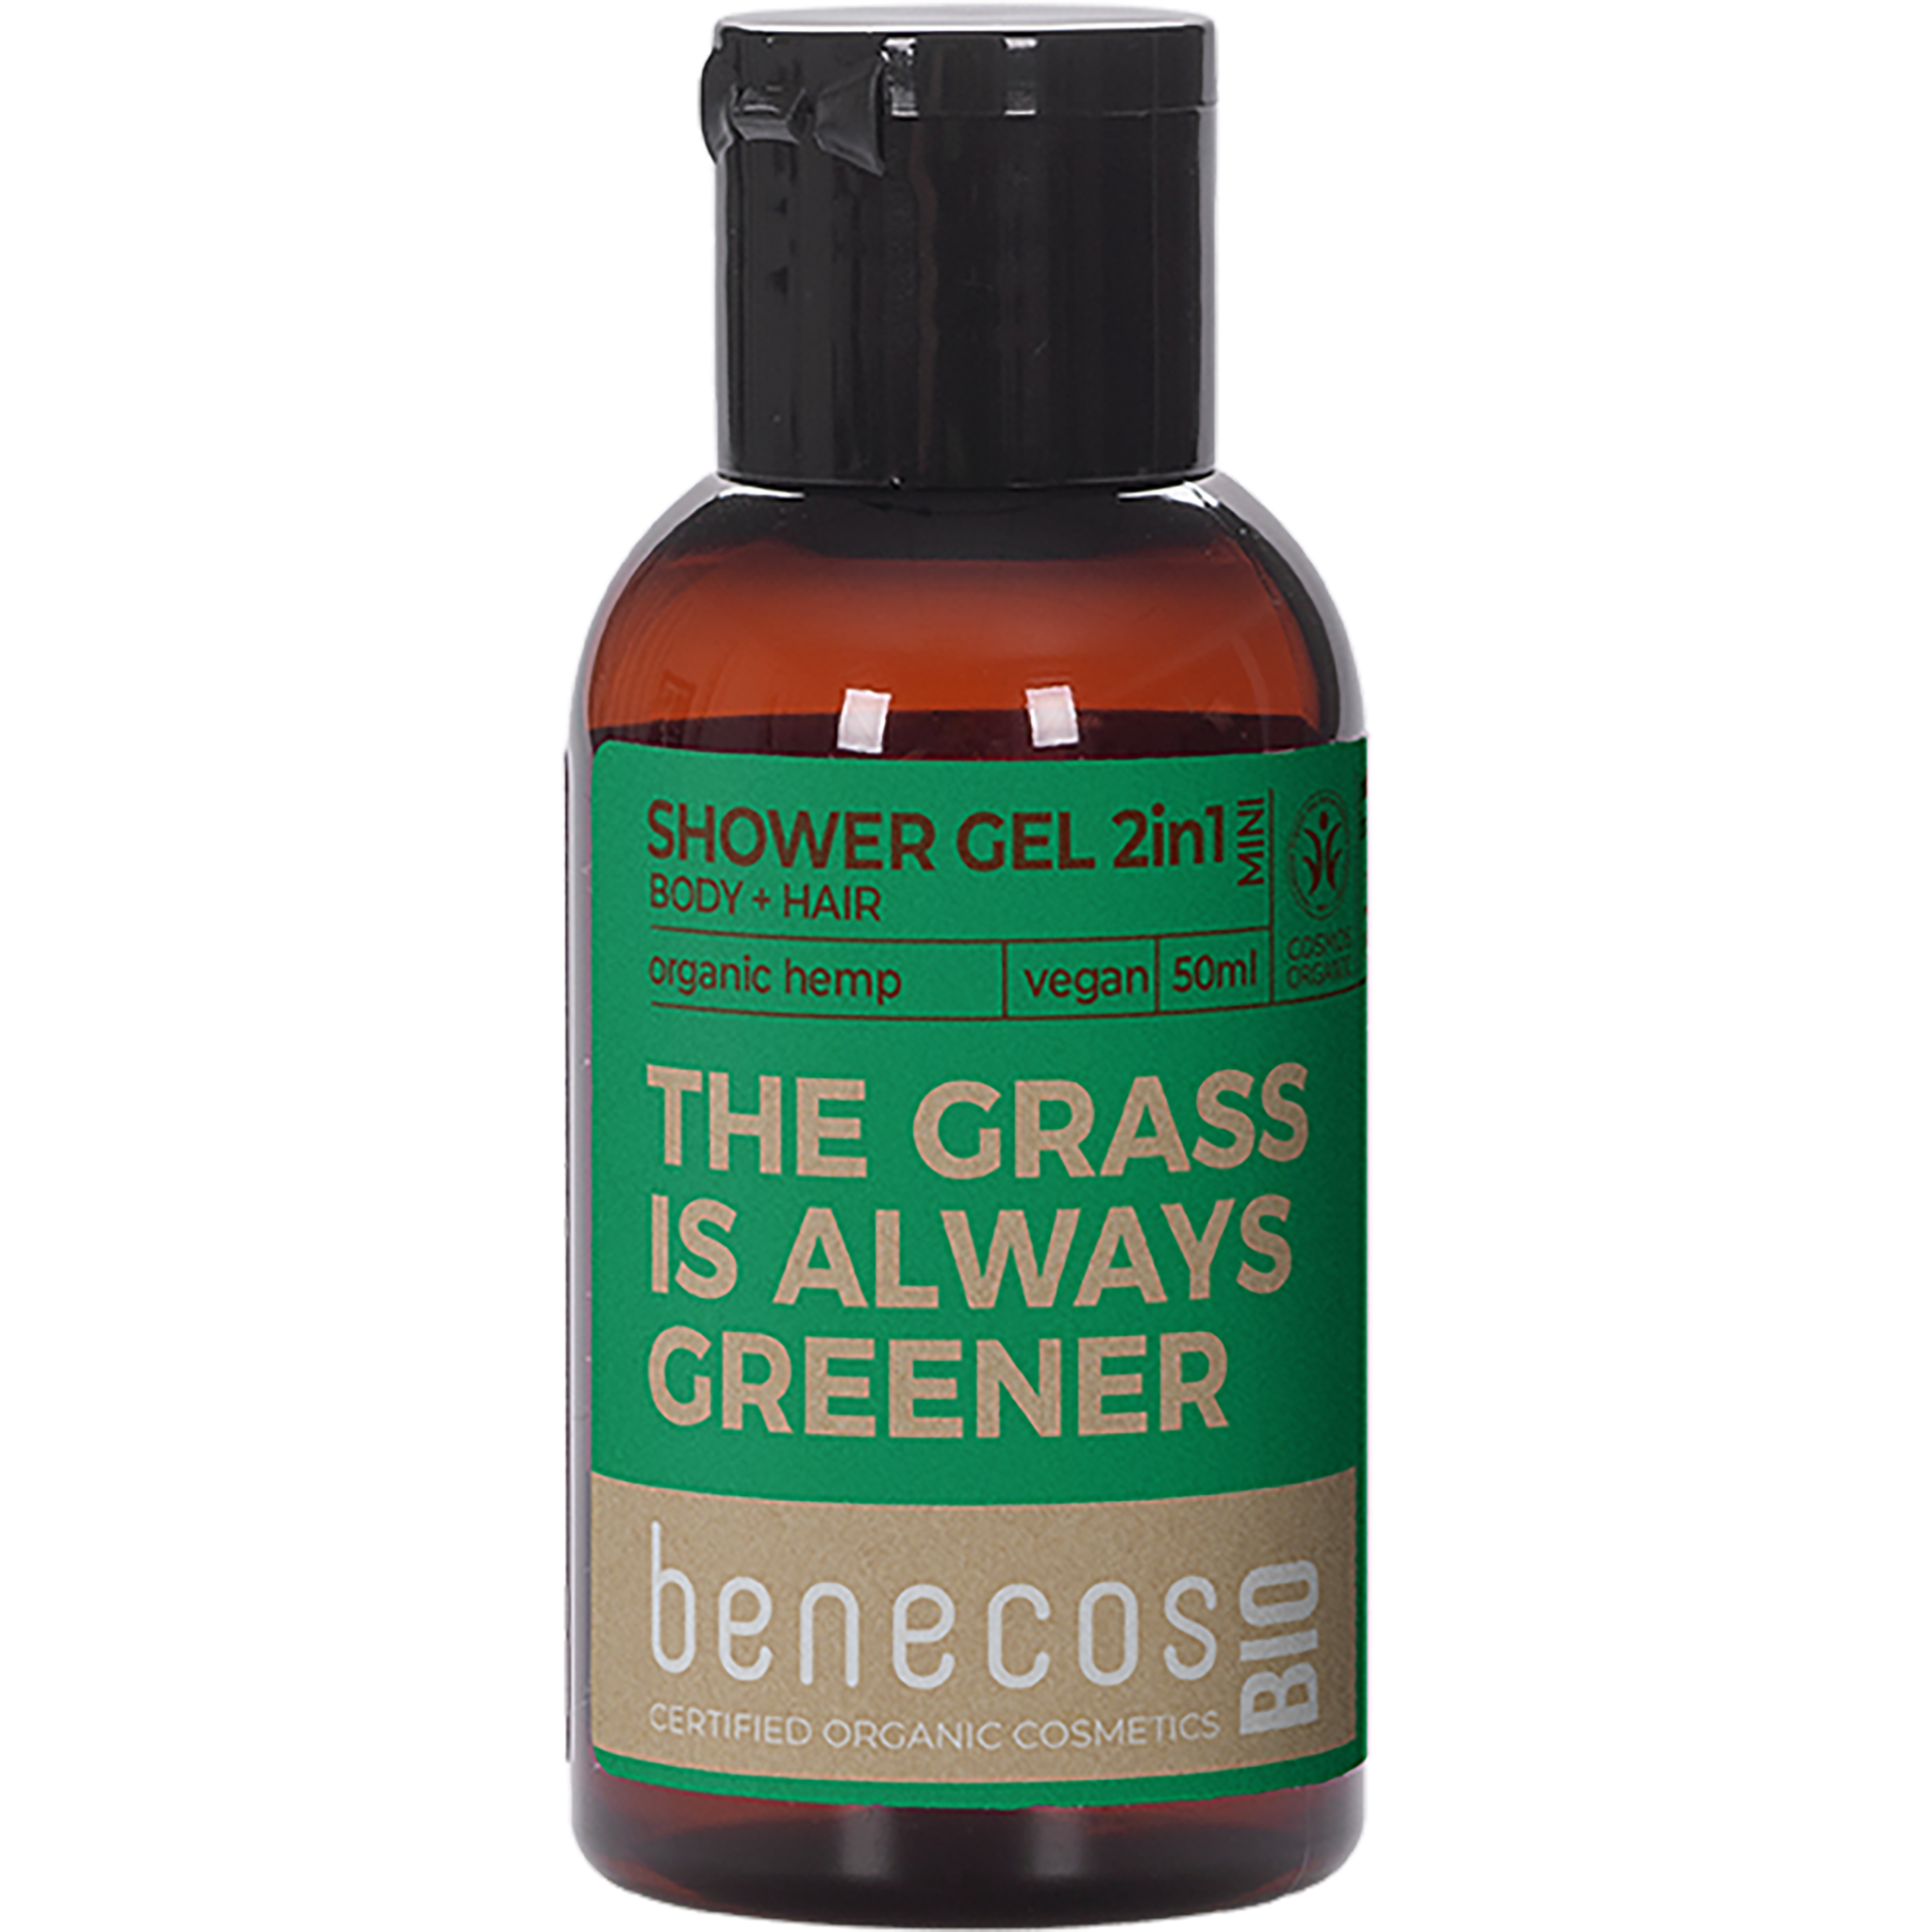 The Grass is Always Greener | 2in1 Hair & Body Wash